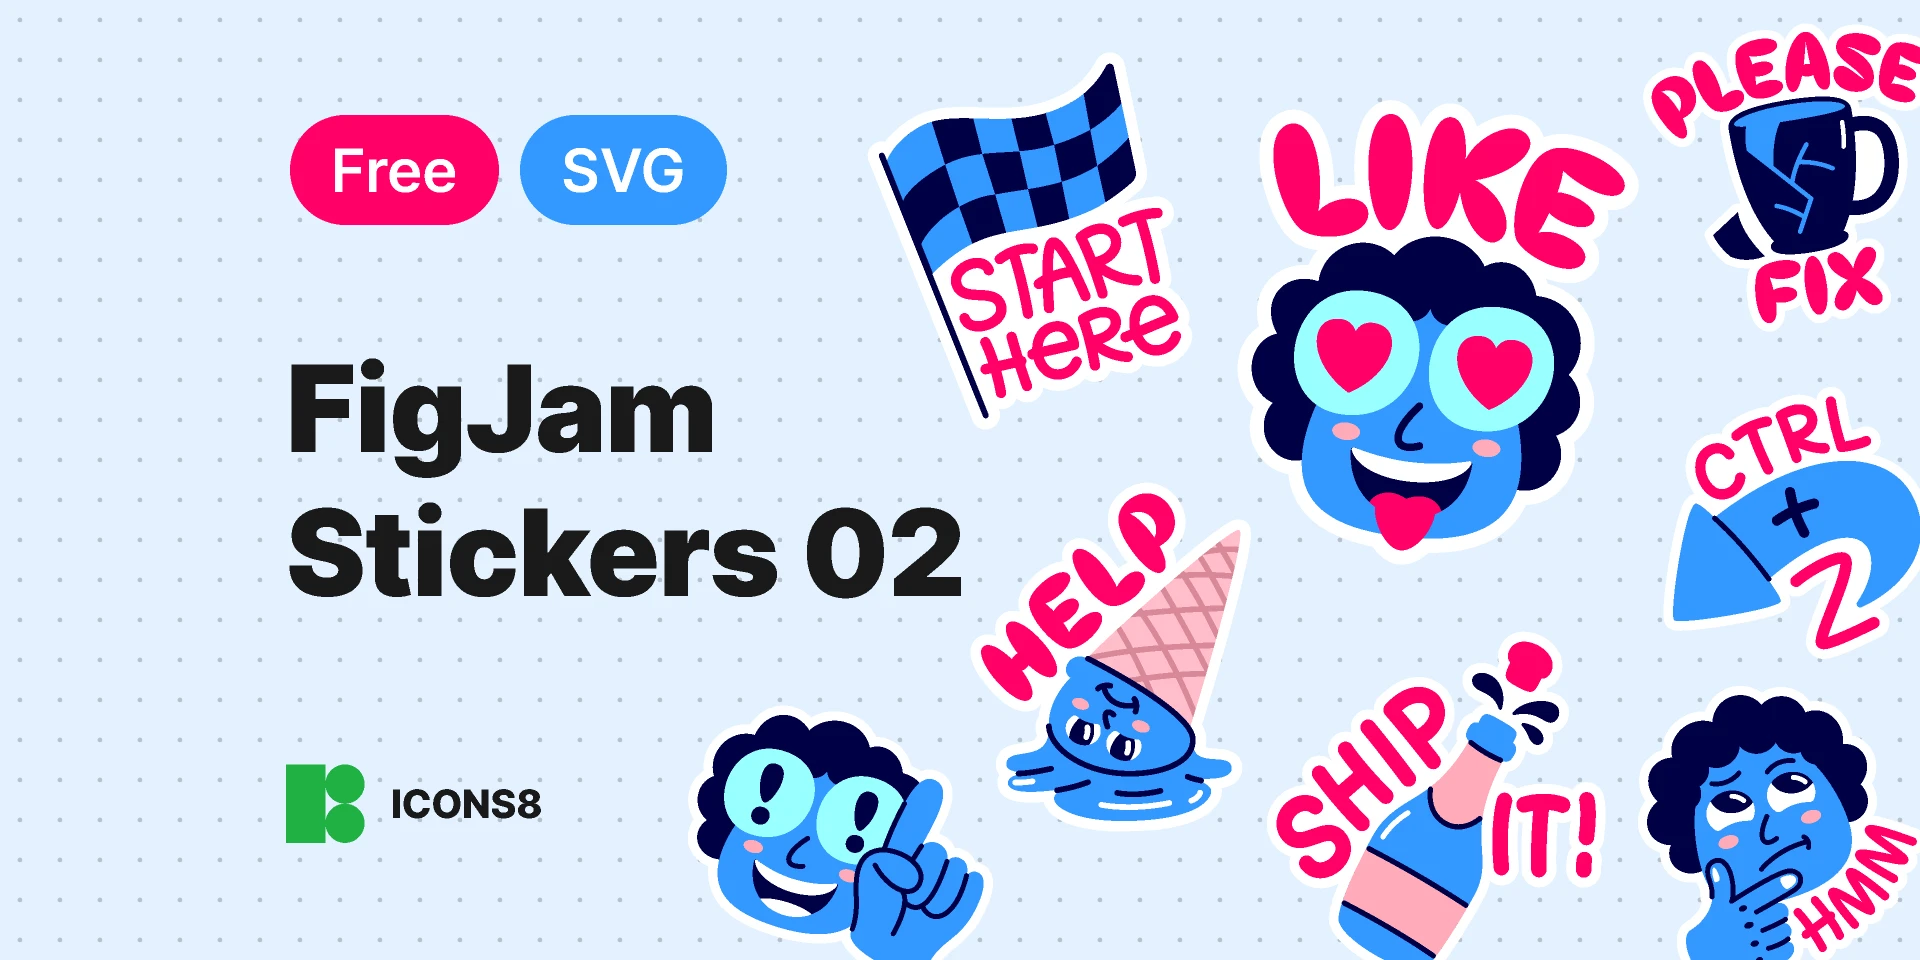 FigJam stickers 02 in SVG for Figma and Adobe XD